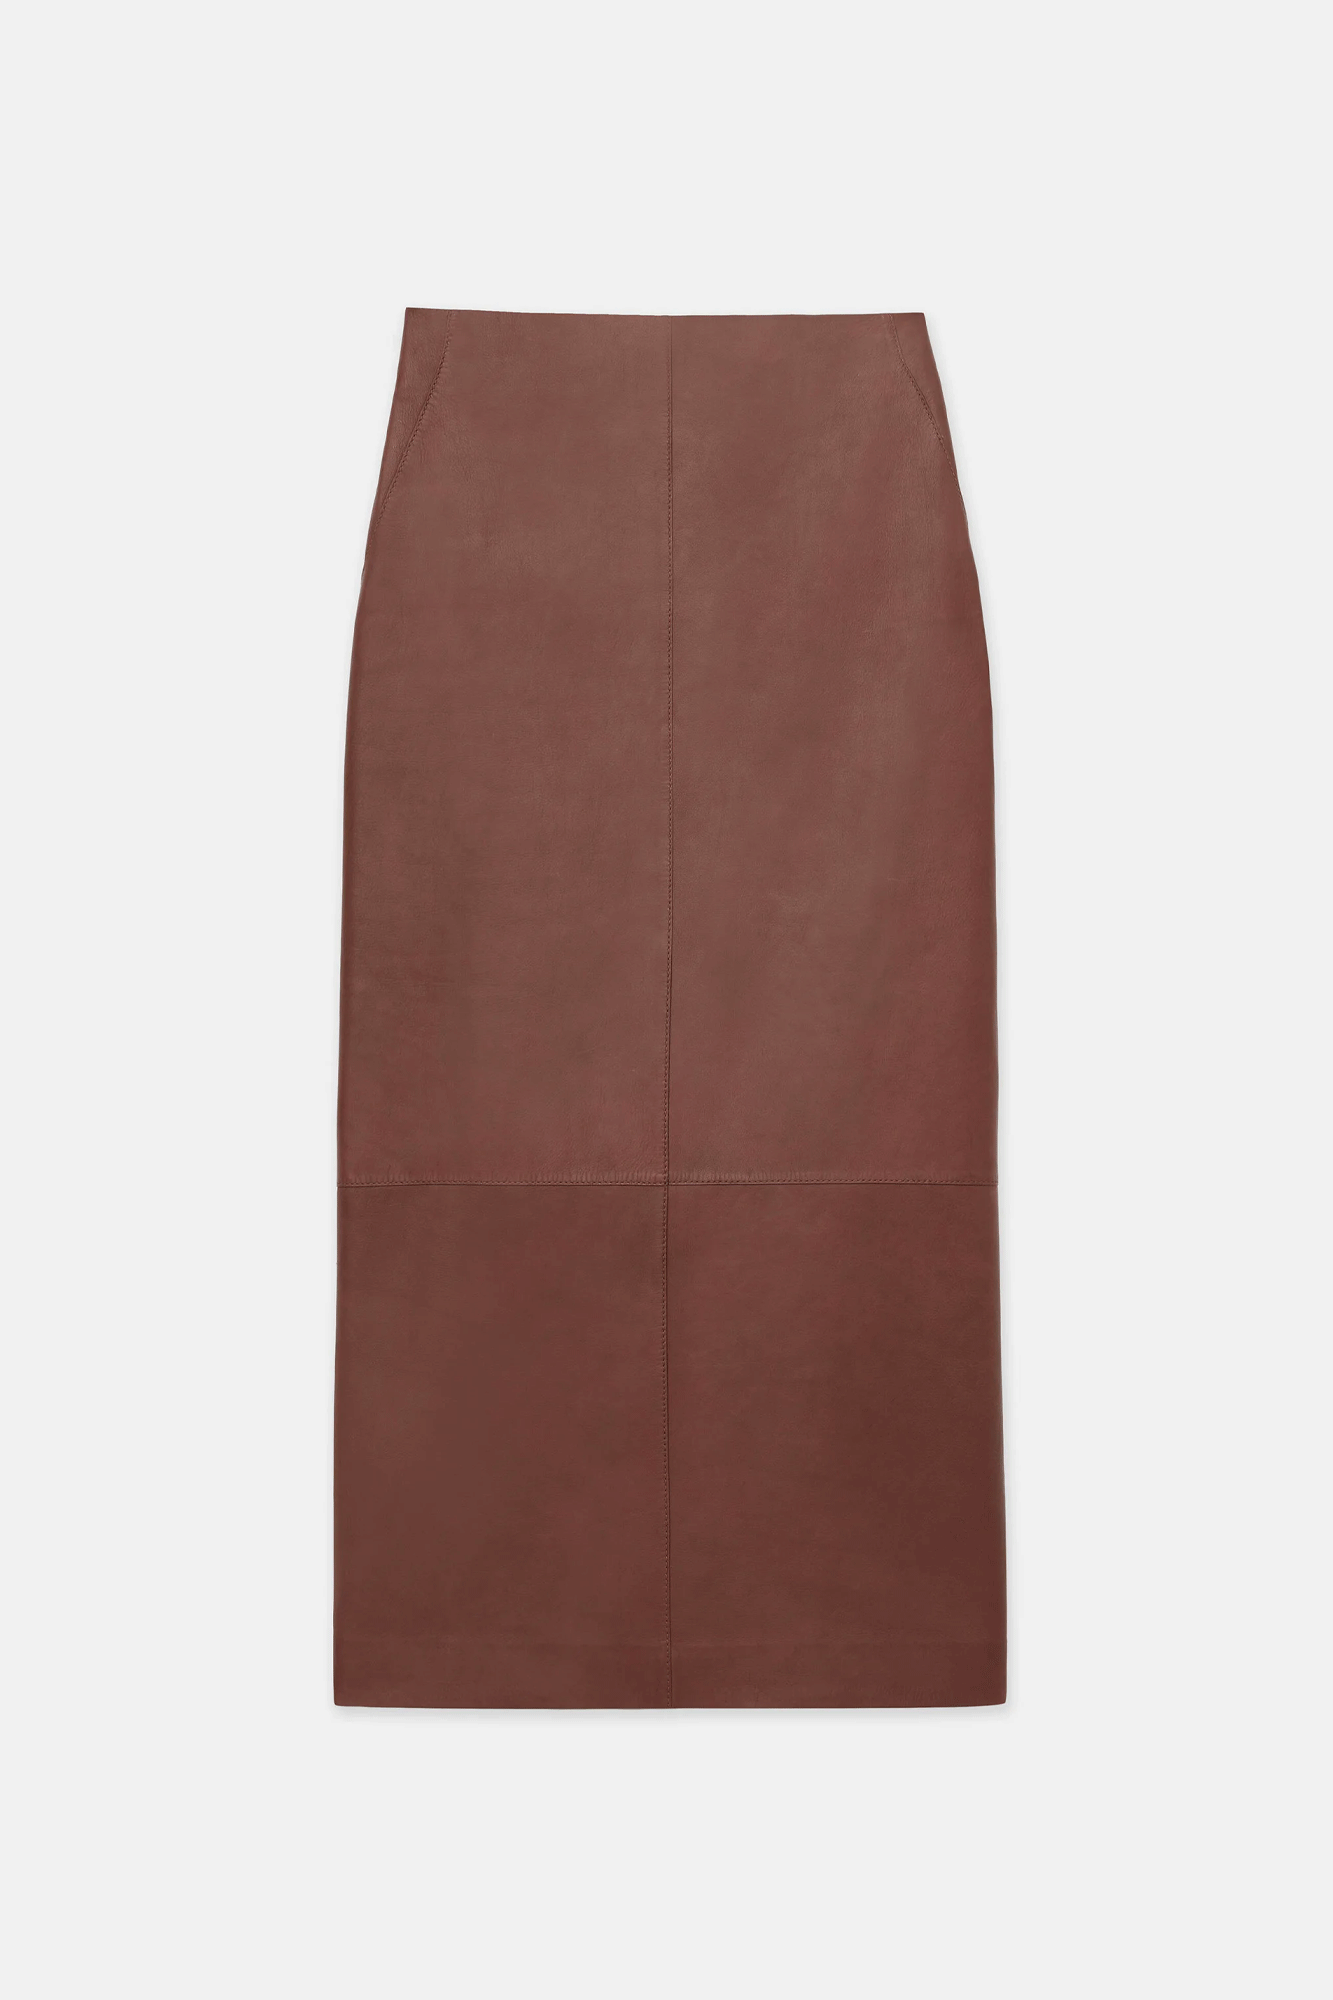 Crafted from Italian nappa lambskin, this Belted Back Pencil Skirt from Lafayette 148 offers a sleek, tailored silhouette. Perfectly cut with a slim fit and midi length hem, this high-waisted design is finished with a clean side zip and back buckle tab for a contemporary touch.